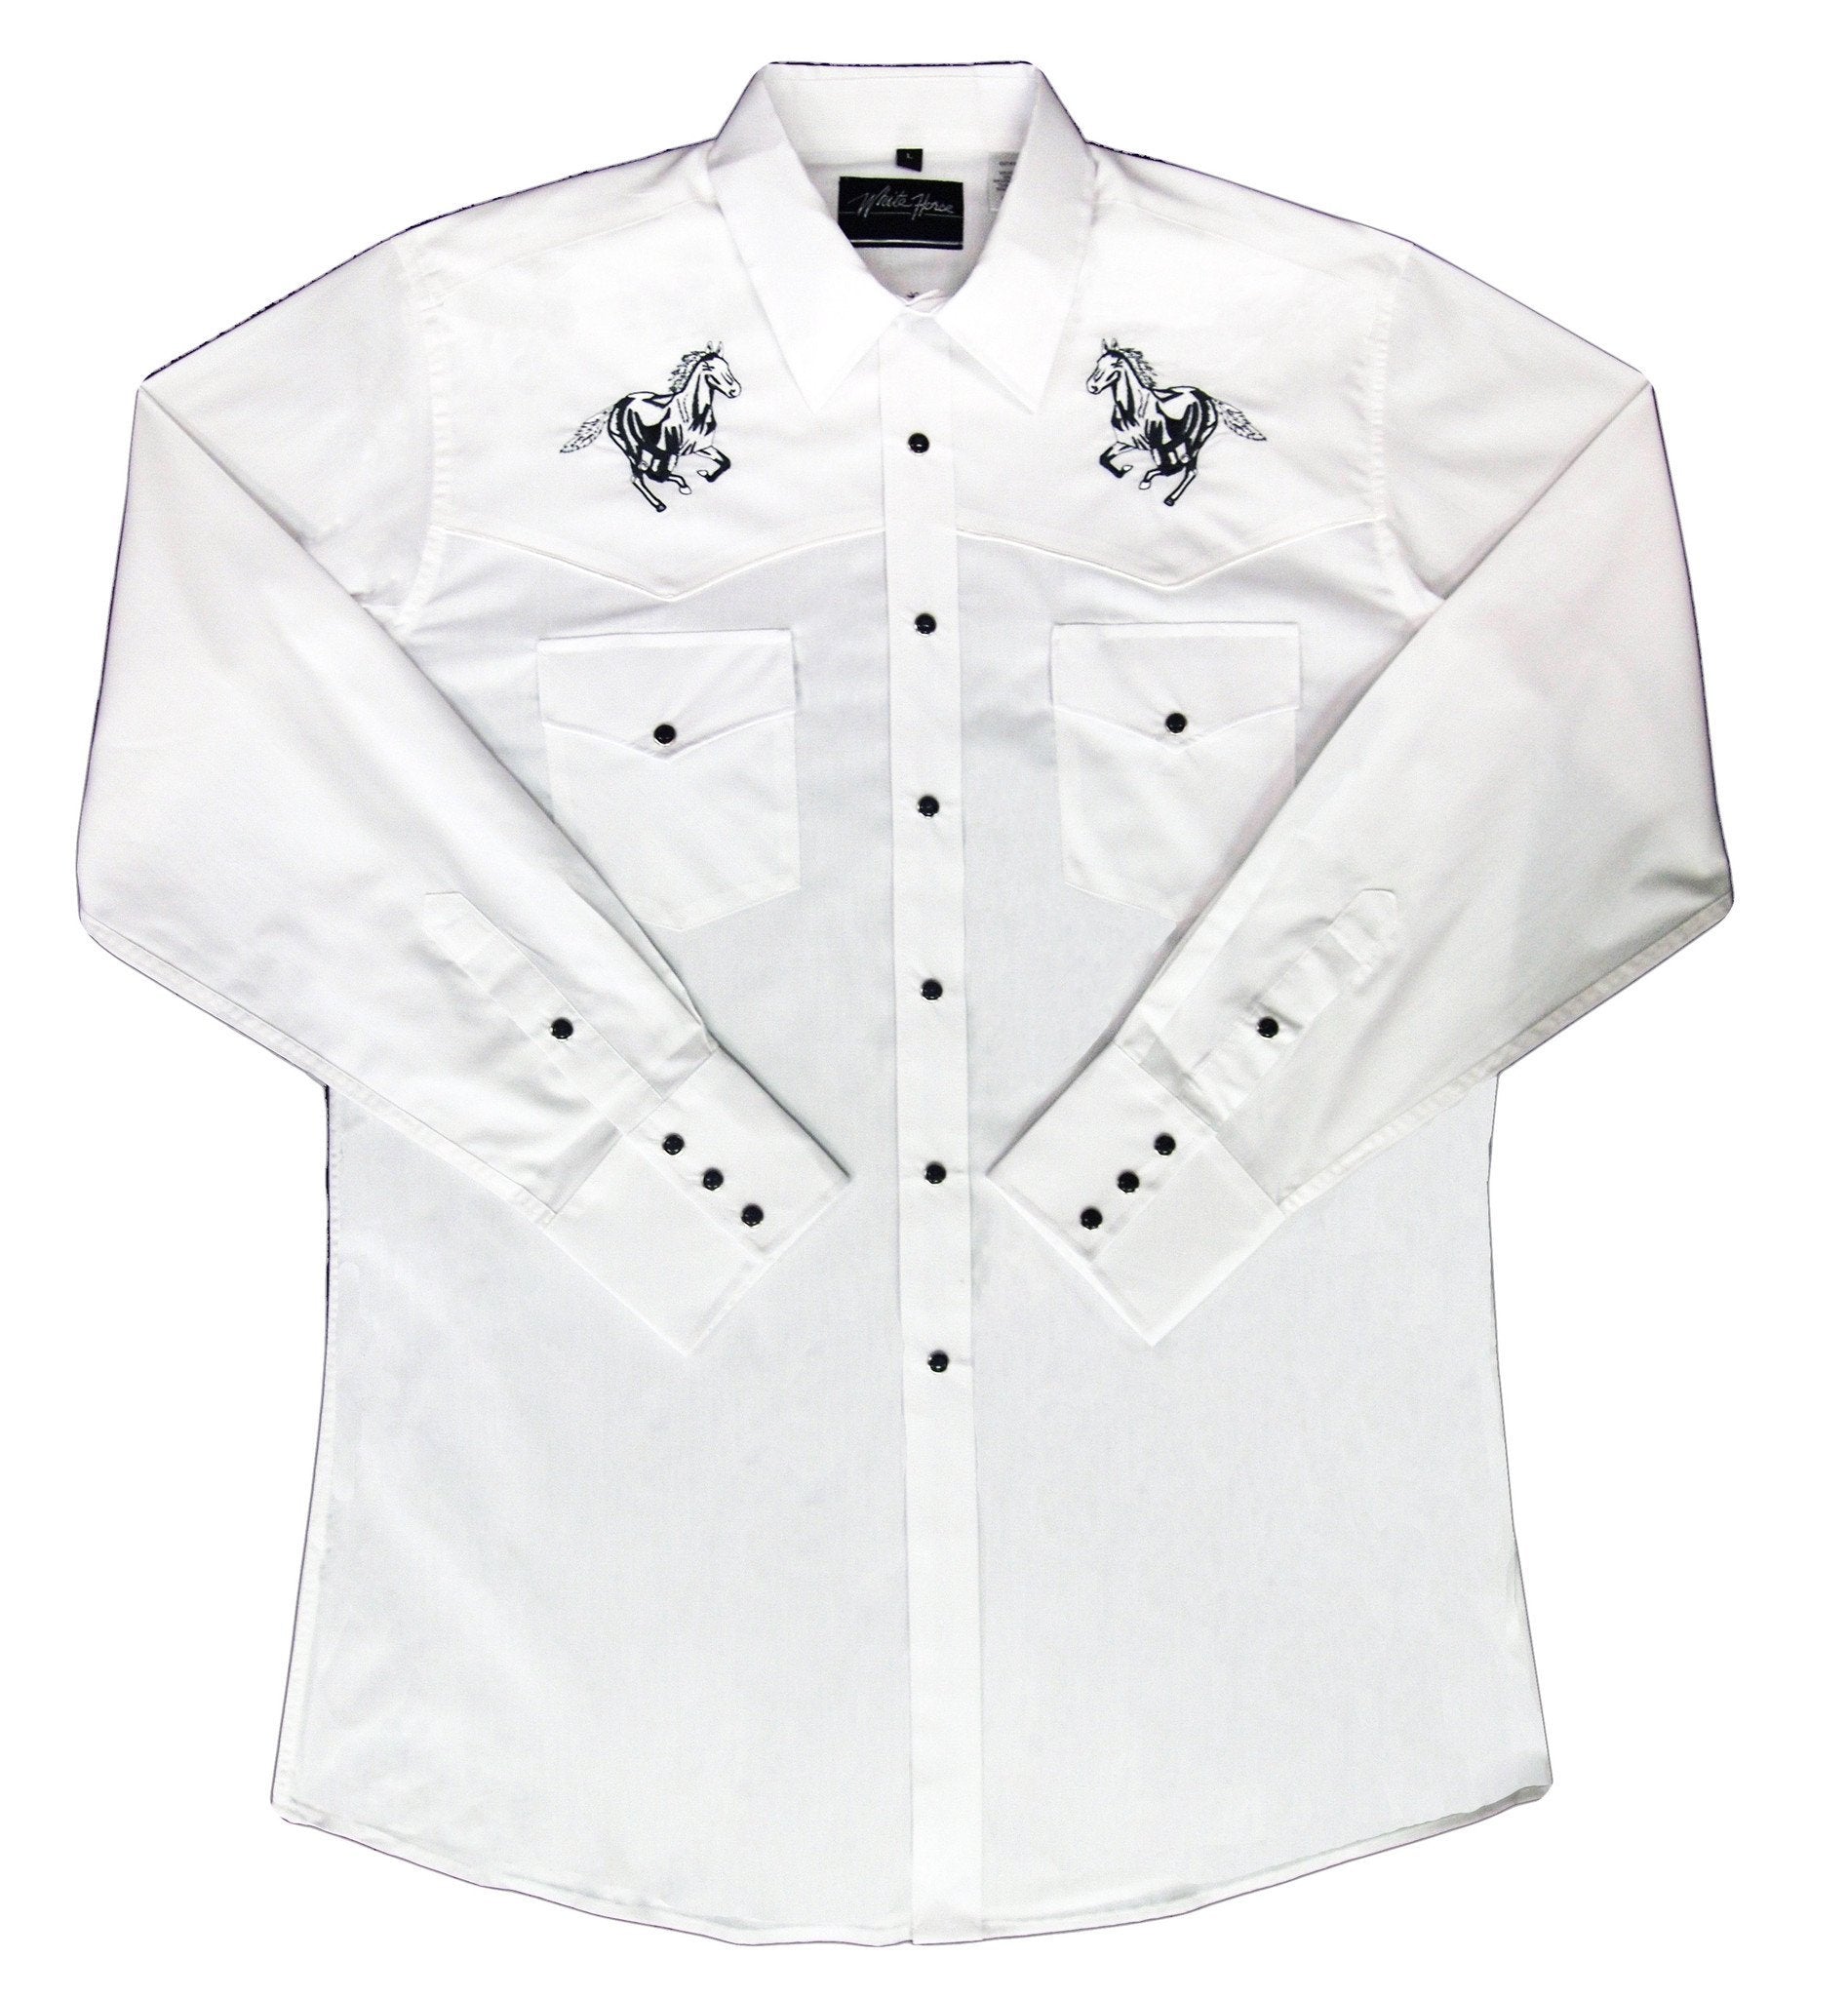 White Horse Men's Embroidered Horse Shirt